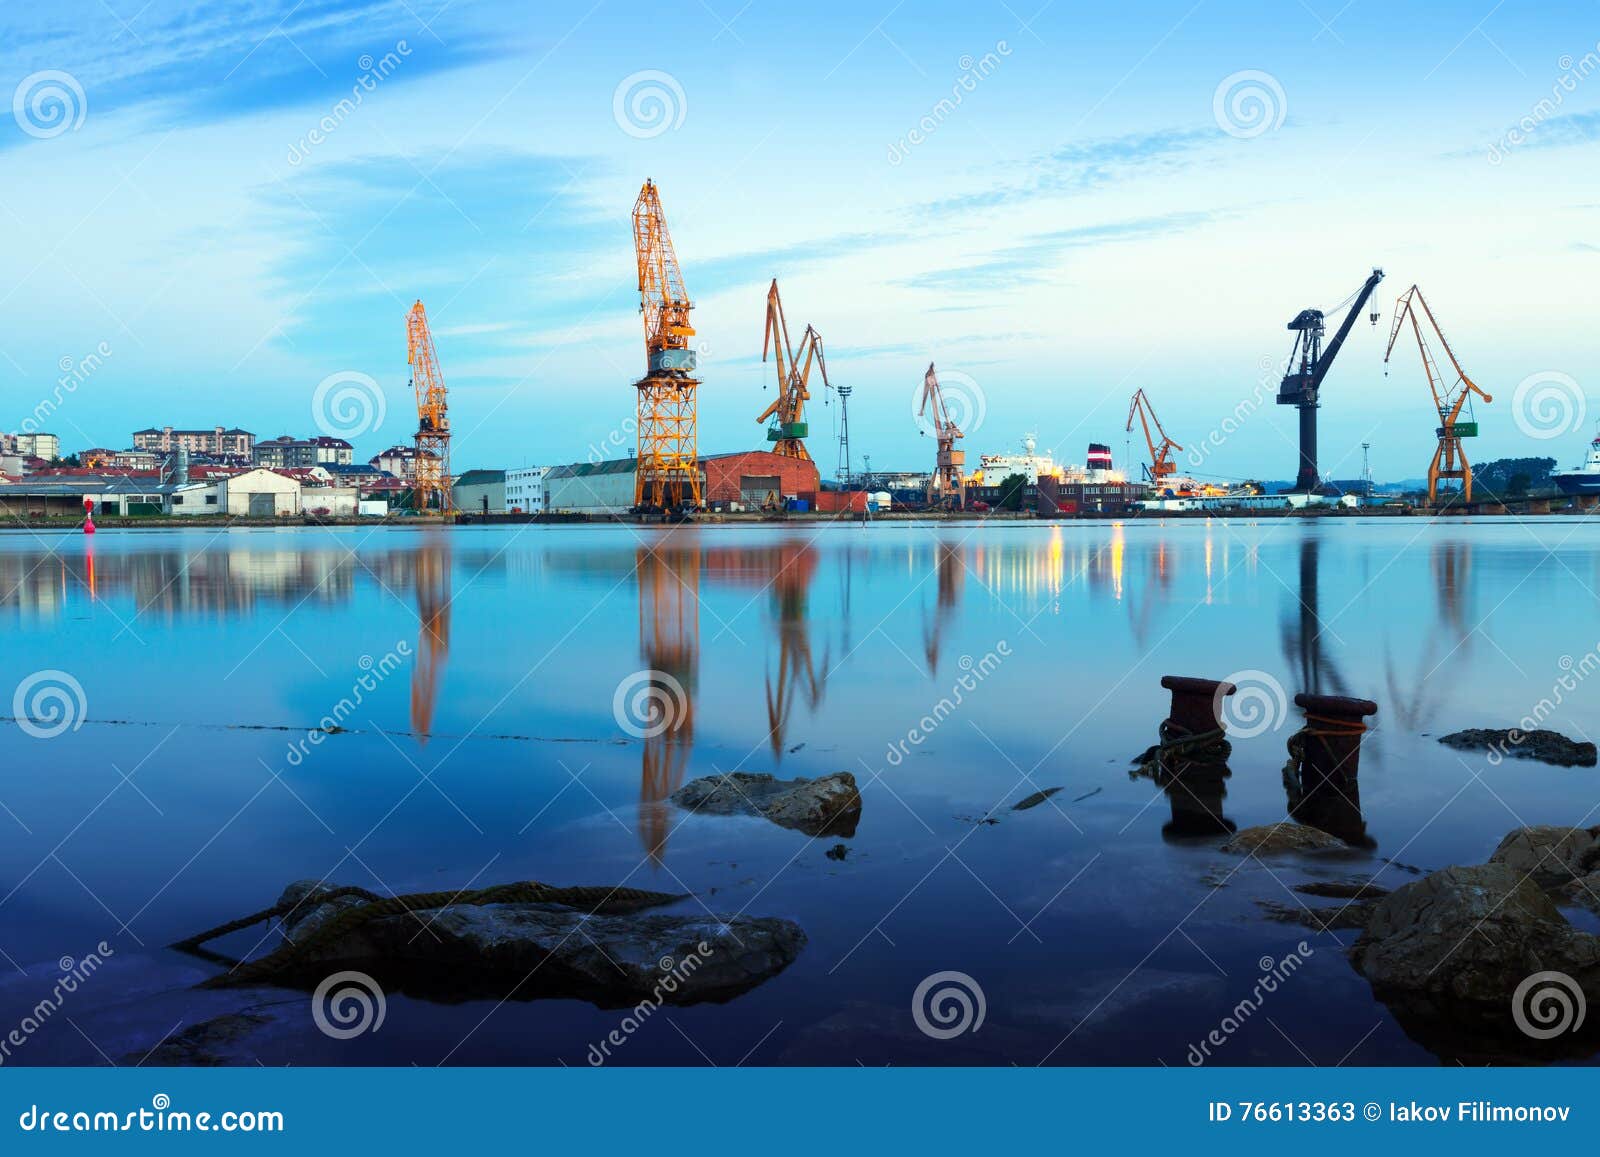 morning view of cranes in cargo seaport